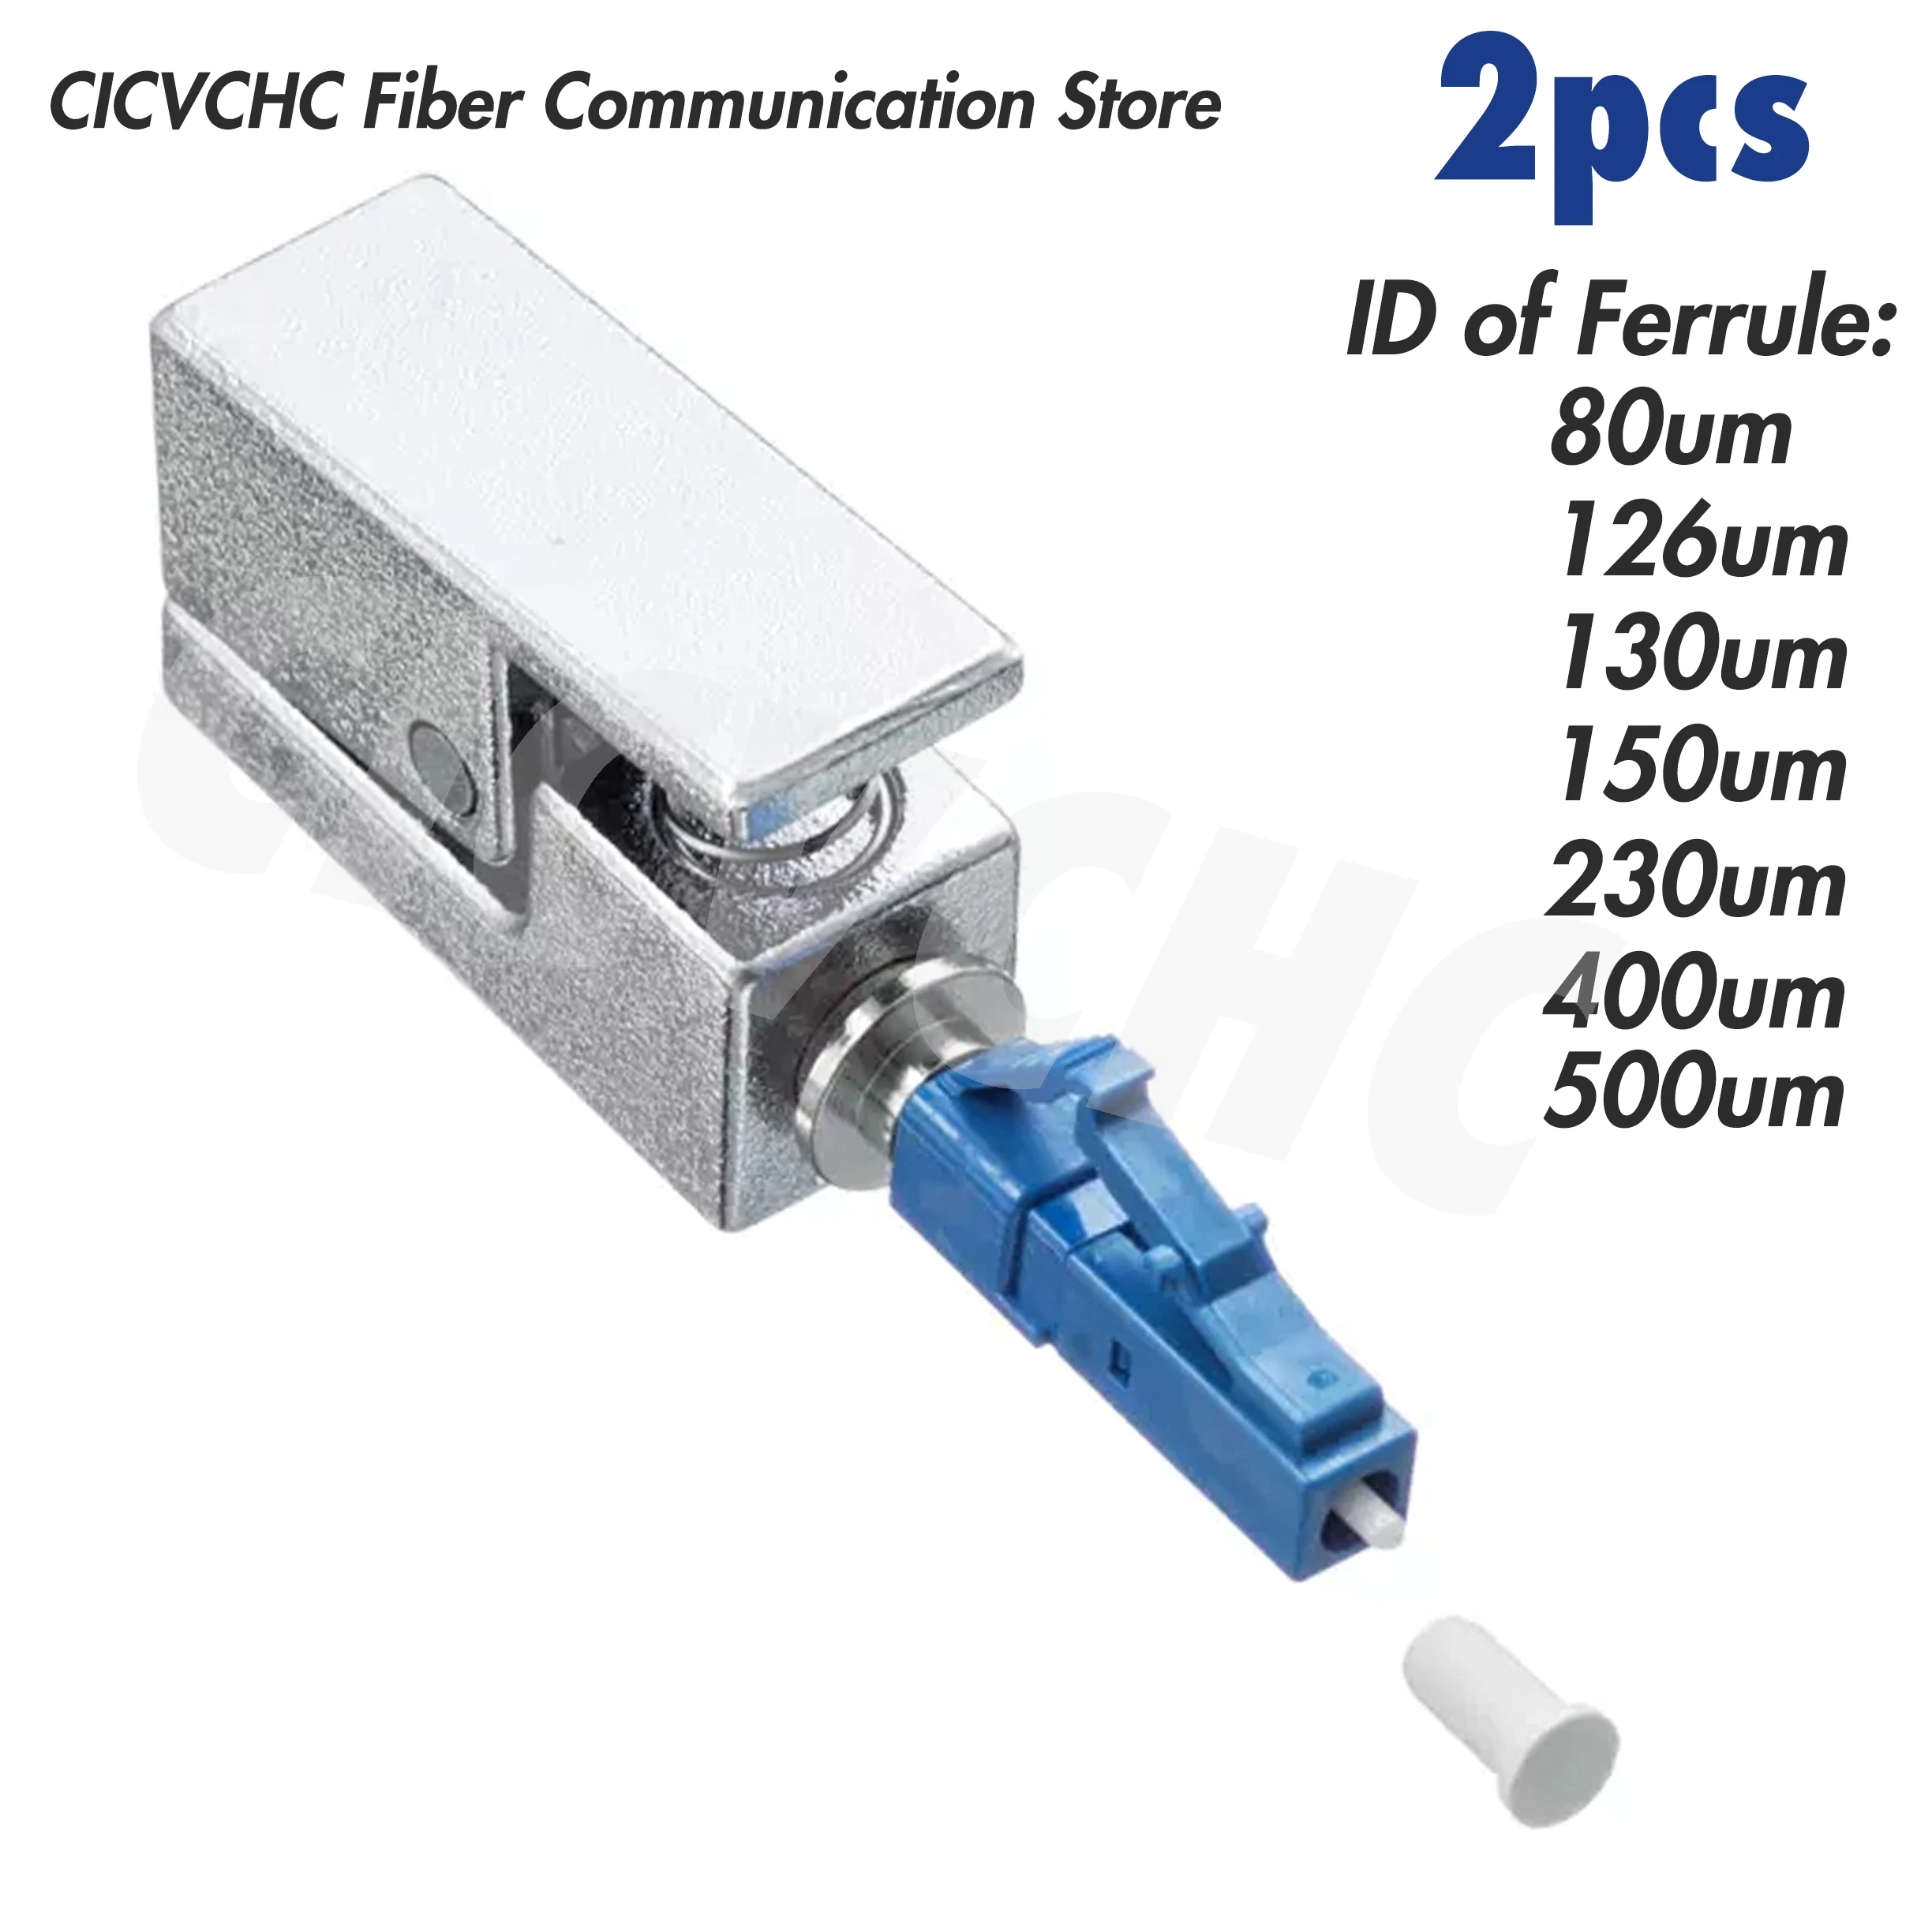 2pcs LC Bare Fiber Adapter with 80 to 600um Inner Diameter of Ferrule-Type, optical fiber testing 2pcs ee spx303n ee spx403n photoelectric switch u slot l type optical coupling infrared sensor limit in stock